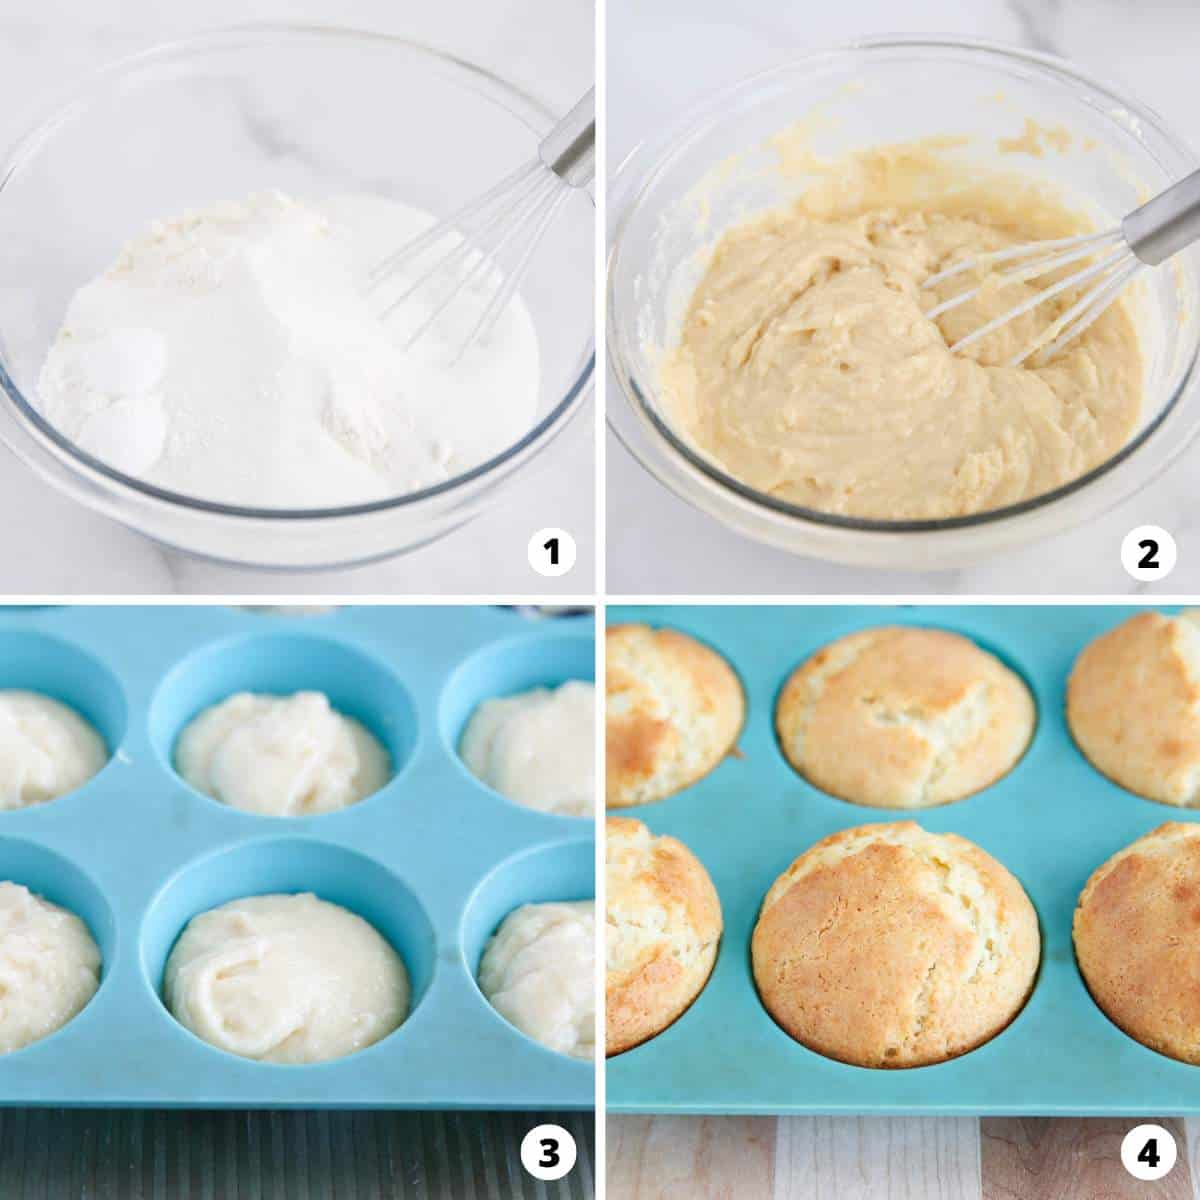 Showing how to make breakfast muffins in a 4 step collage.